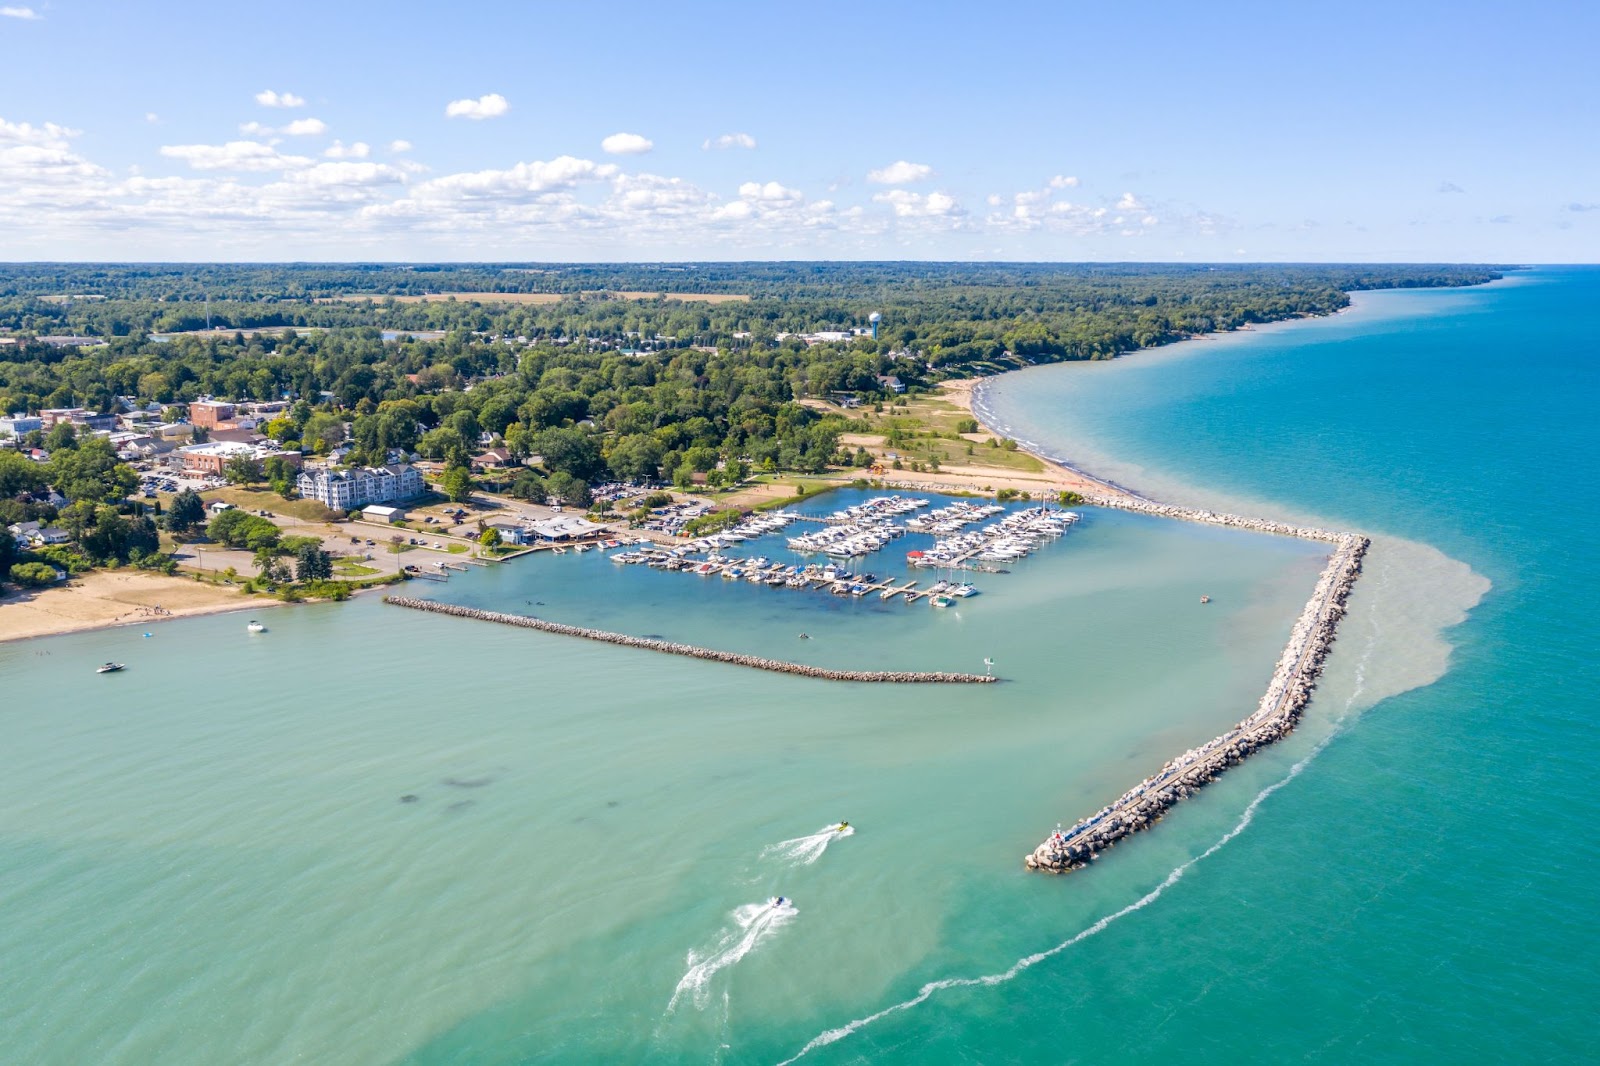 Lexington State Harbor - Photo by Michigan Dept of Natural Resources